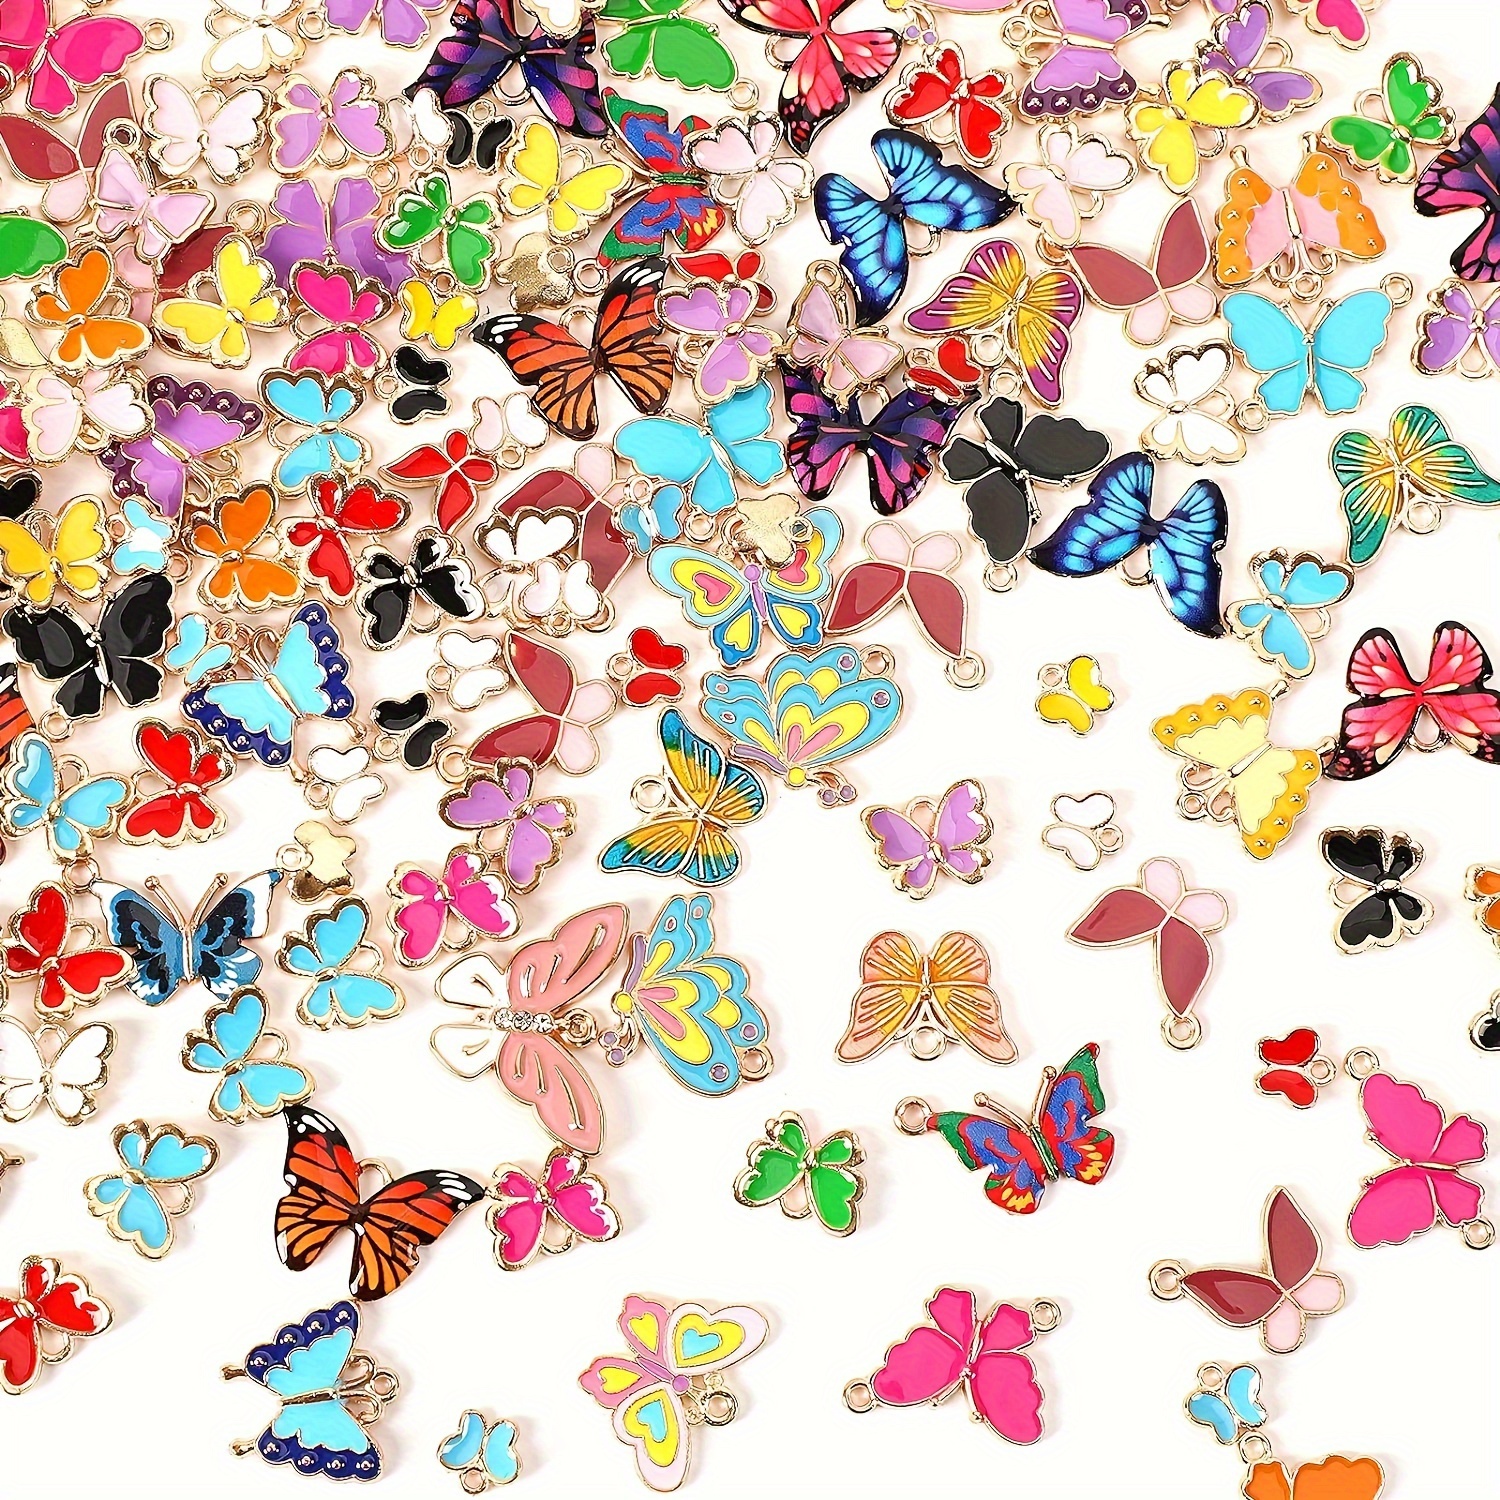 

50pcs Mixed Loading Butterfly Charms For Jewelry Making, Assorted Alloy Butterfly Pendants For Diy Necklace Bracelet Earrings Making